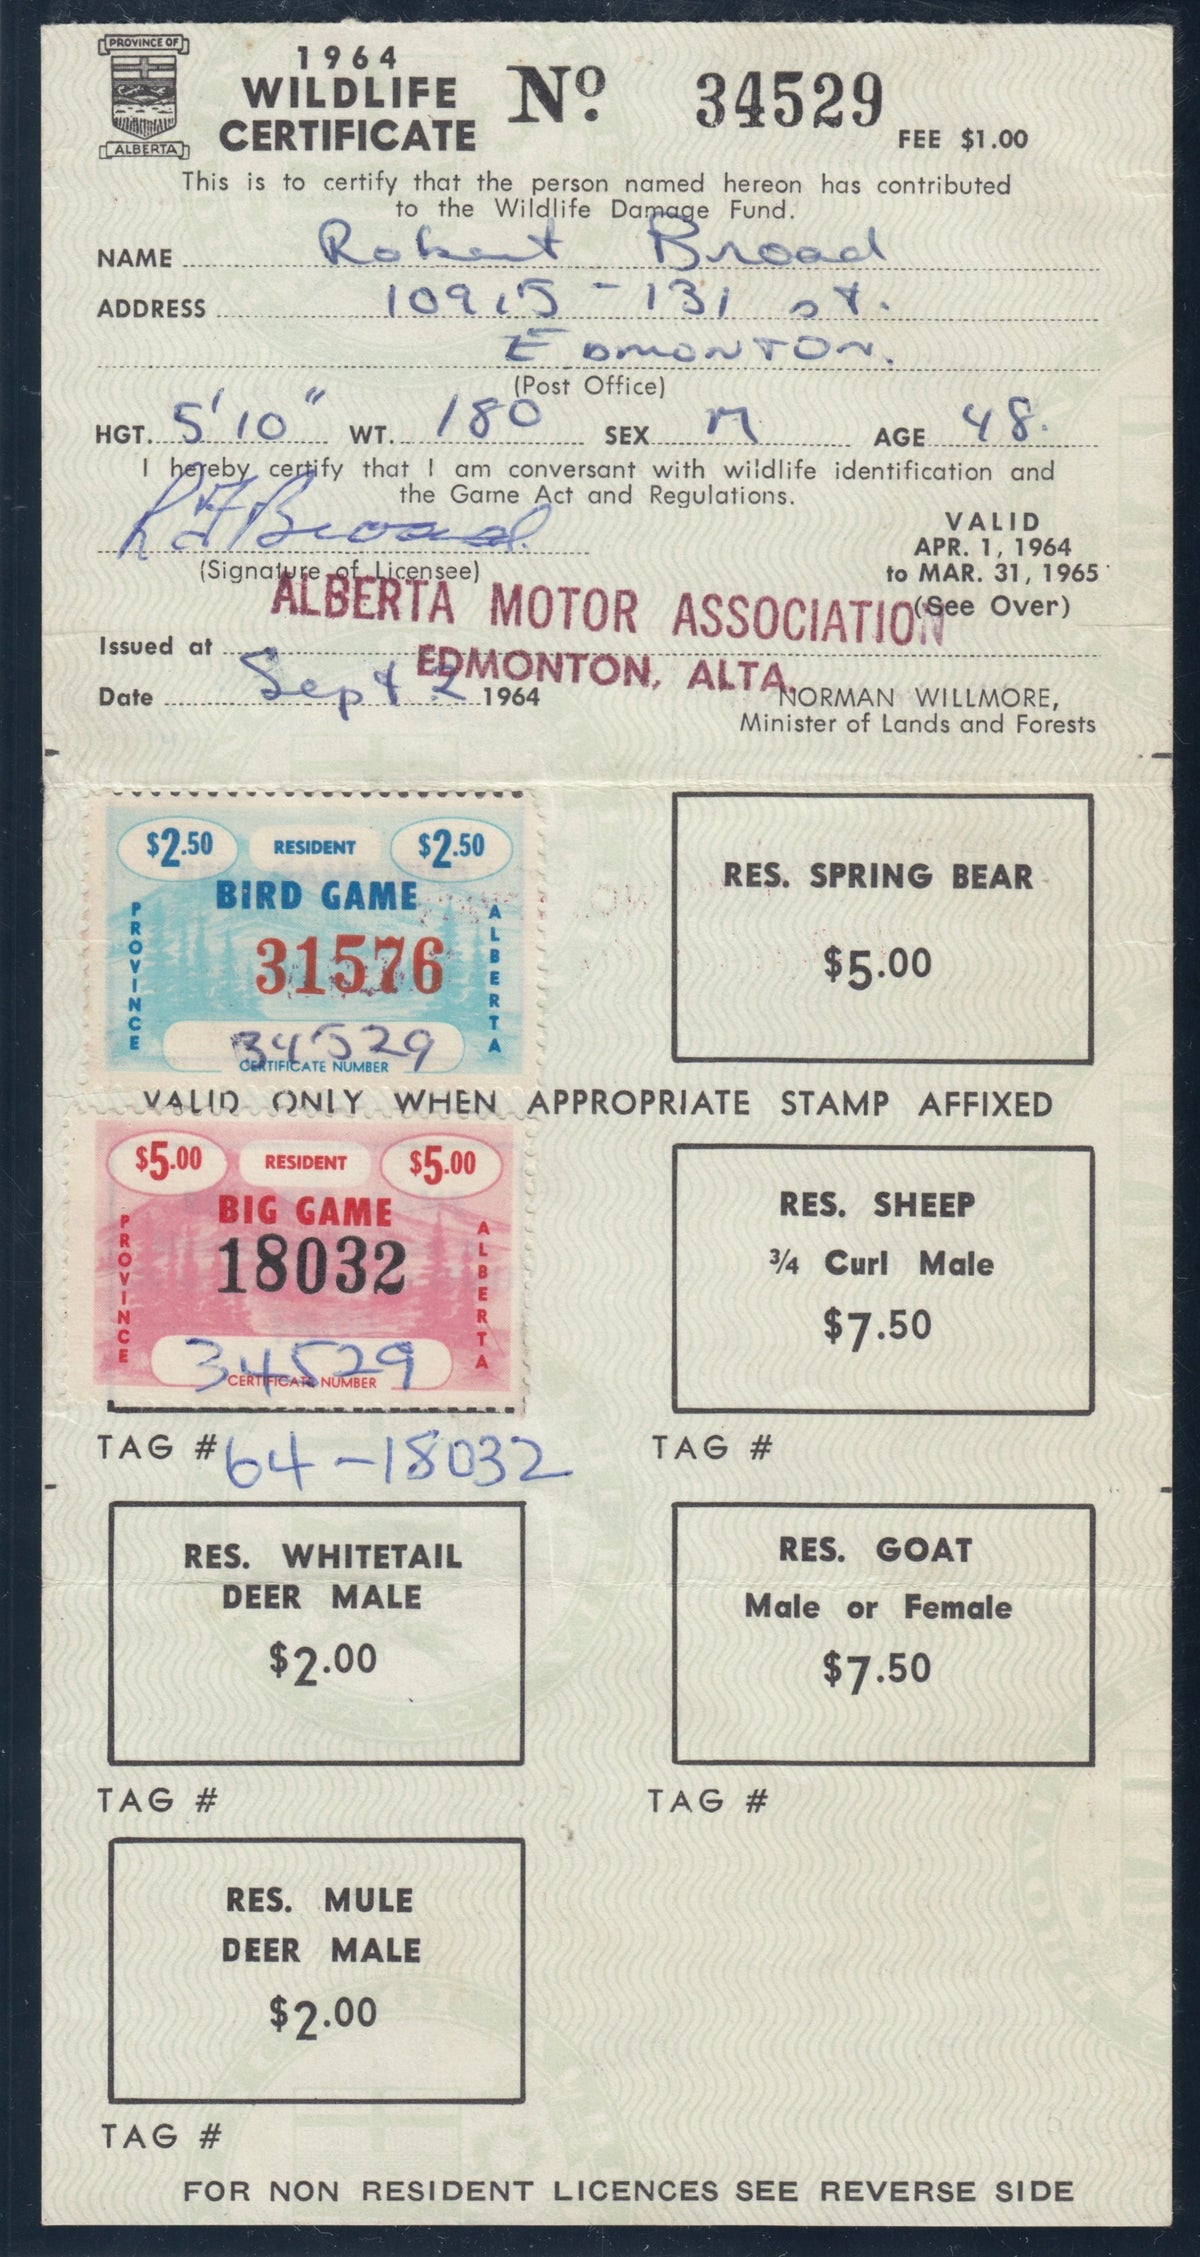 0343AW2110 - AW1, 2 - Used on License